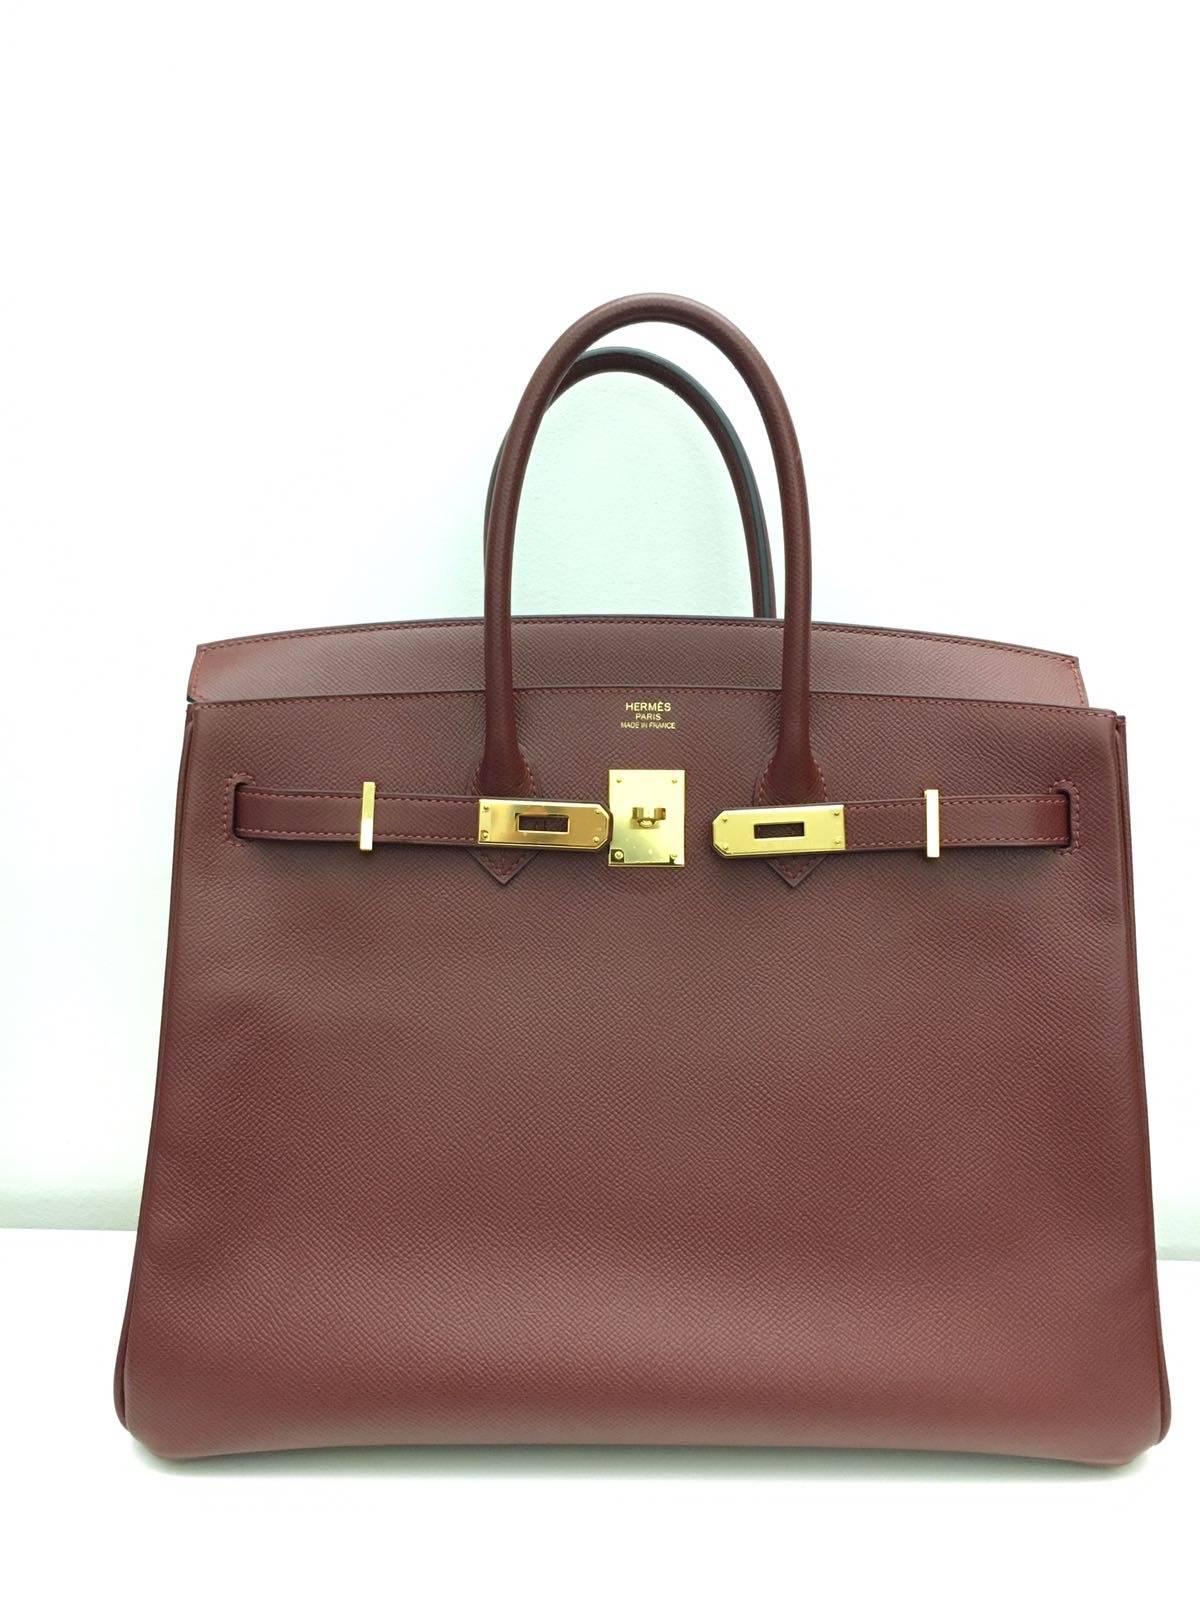 Hermes 
Birkin Size 35
Epsom Leather 
Colour Rouge H
Gold Hardware
store fresh, comes with receipt and full set (dust bag, box...) 
Hydeparkfashion specializes in sourcing and delivering authentic luxury handbags, mainly Hermes, to client around the